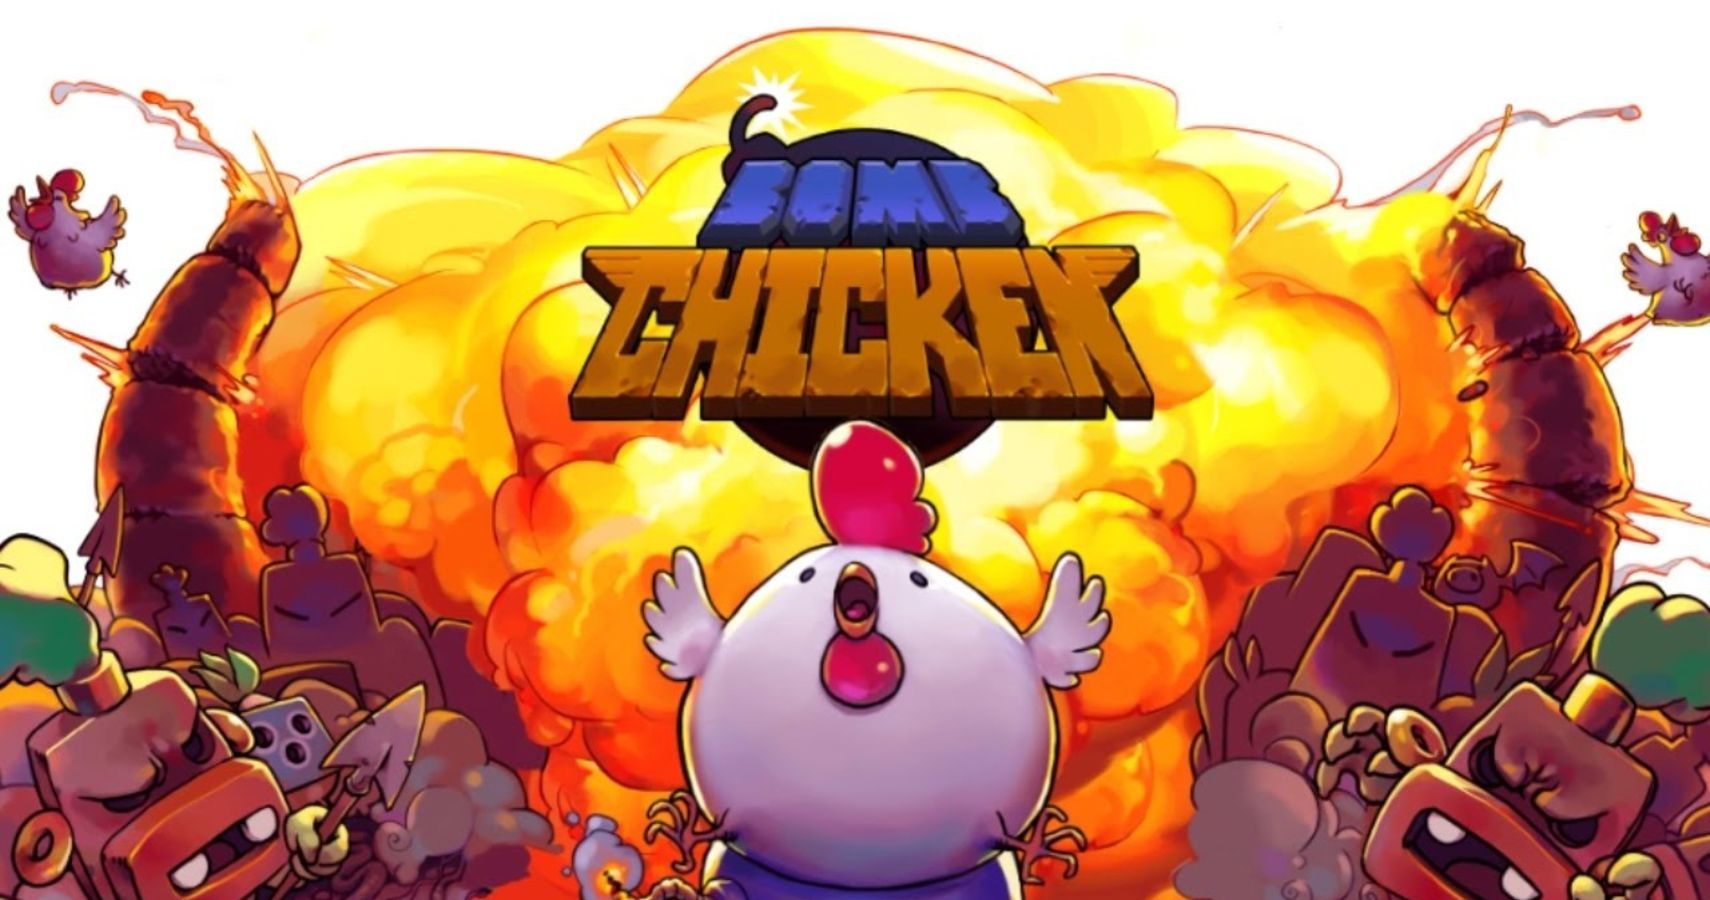 Similar To Fall Guys Bomb Chicken Will Be Getting An Exclusive Mobile Release In China